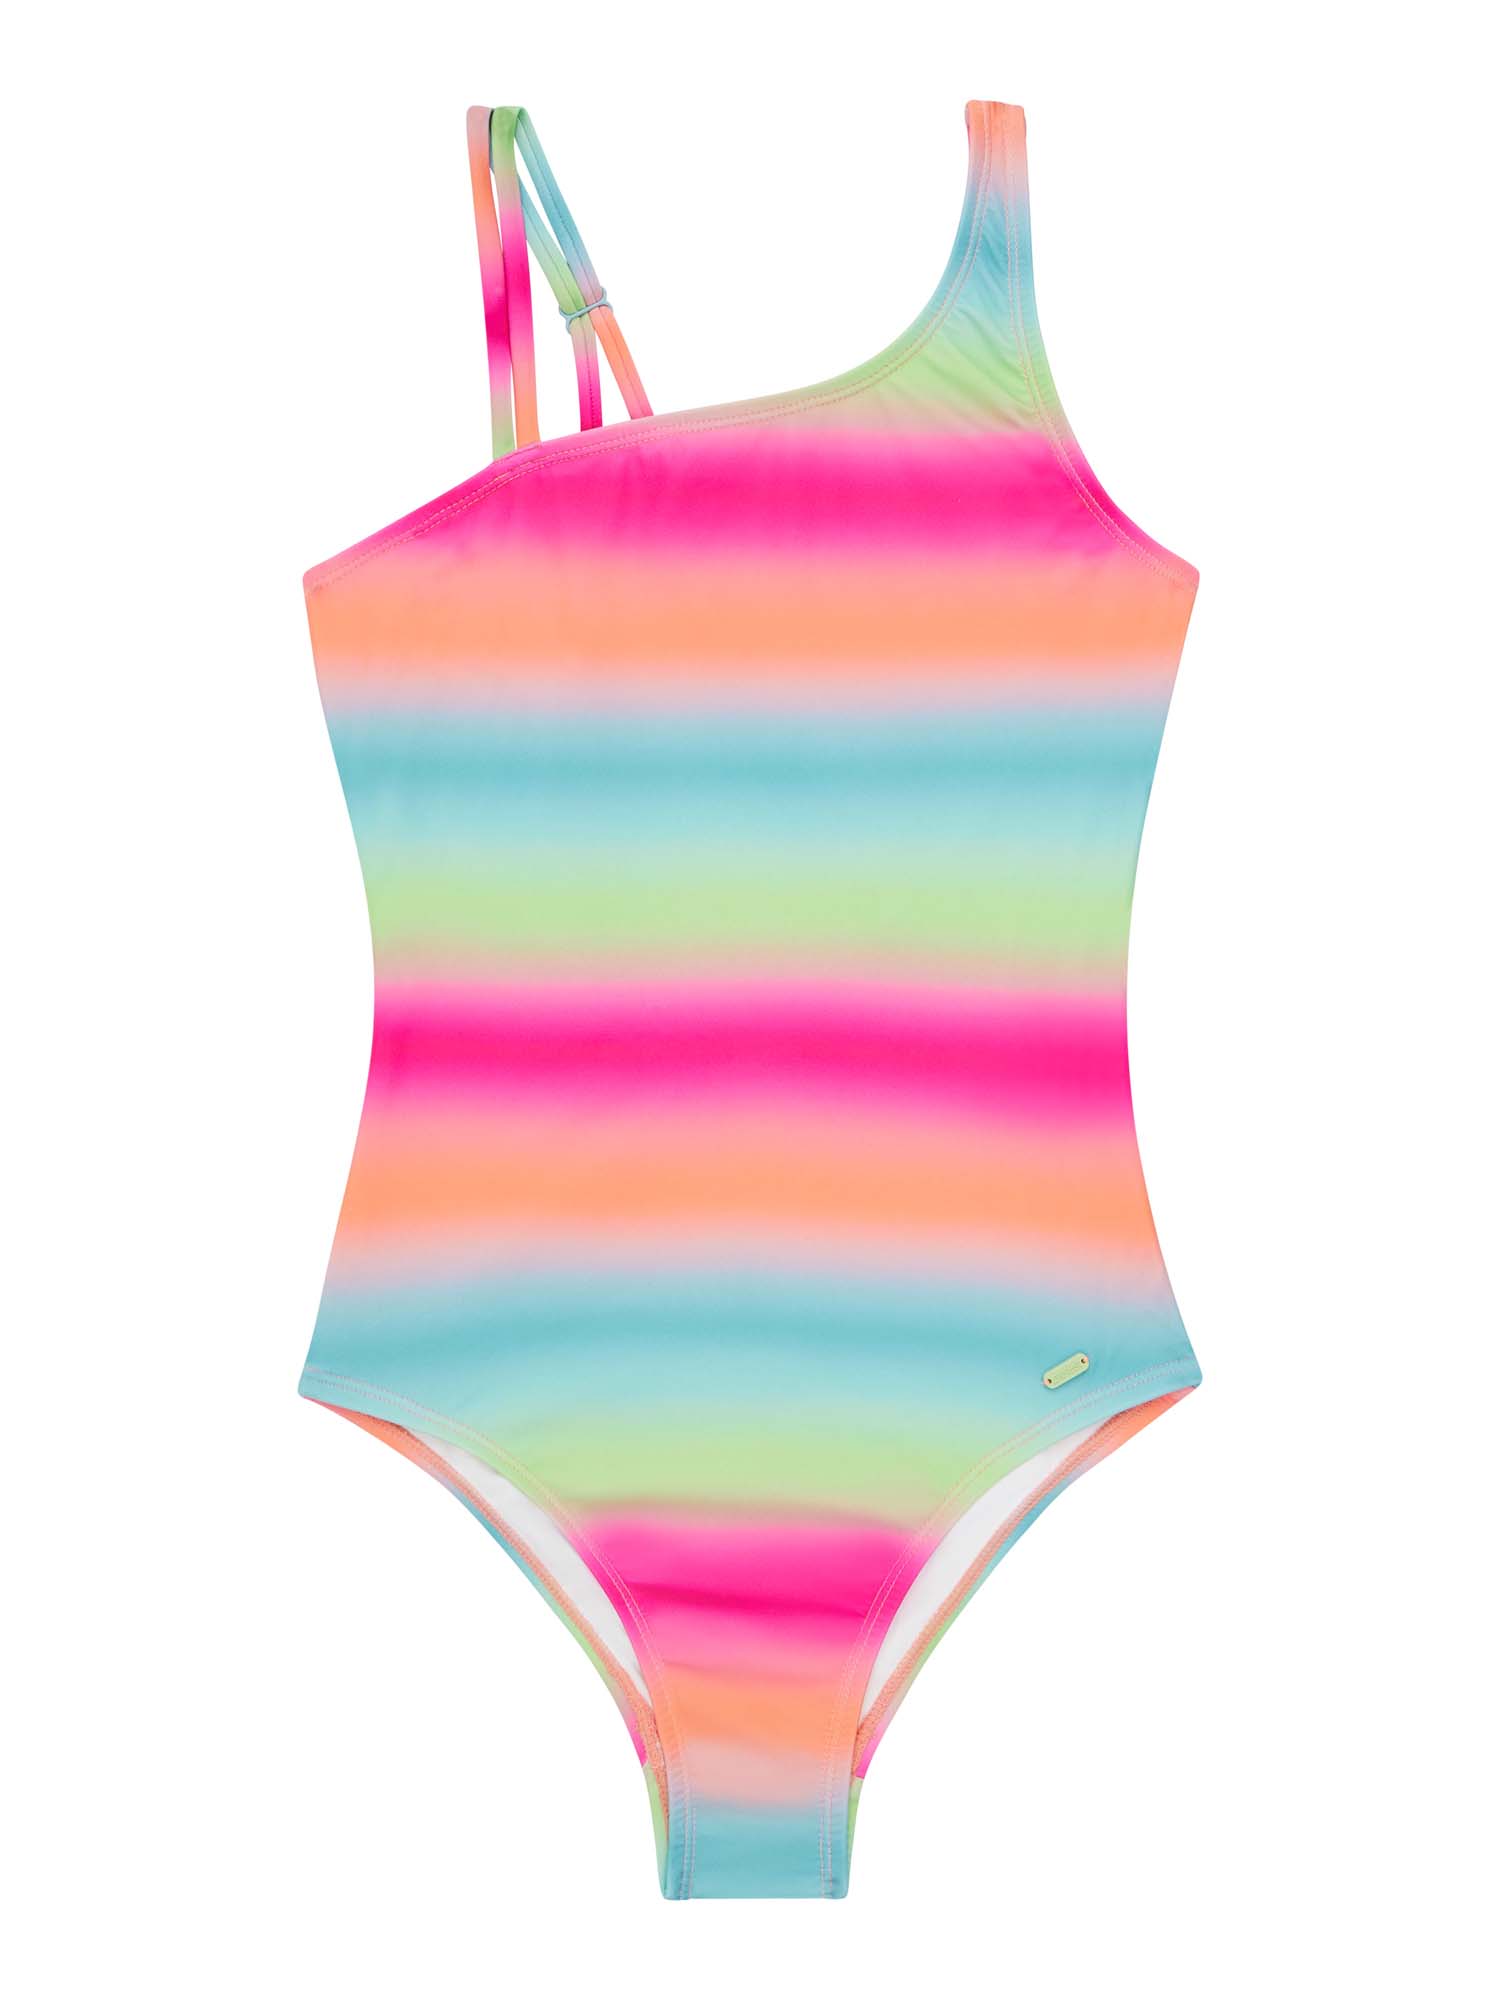 PROTEST prtrica jr swimsuit